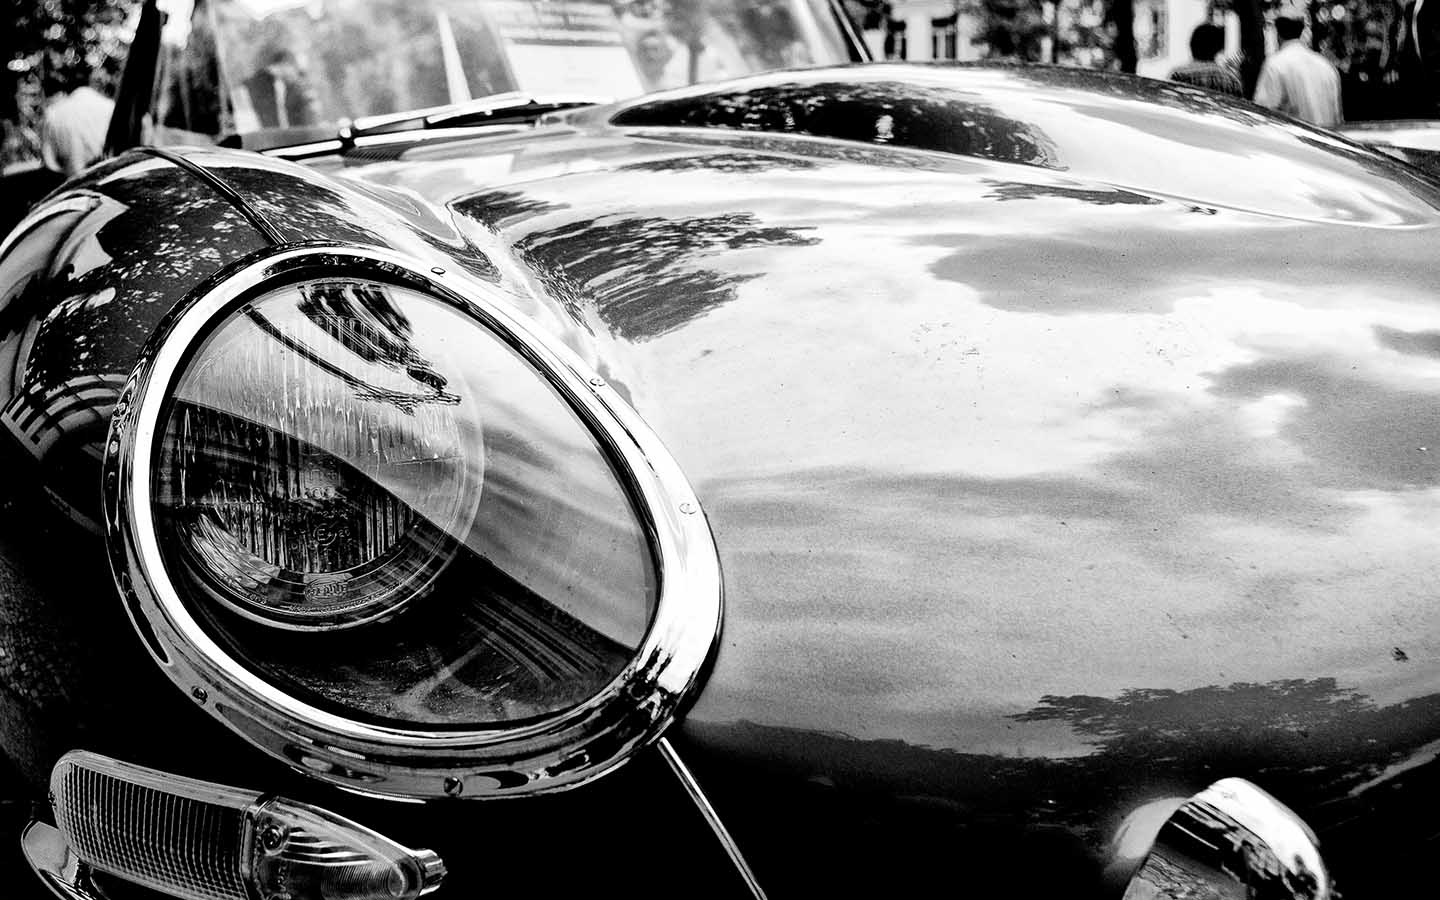 The history of jaguar e-type is a tale of craftsmanship and exclusivity